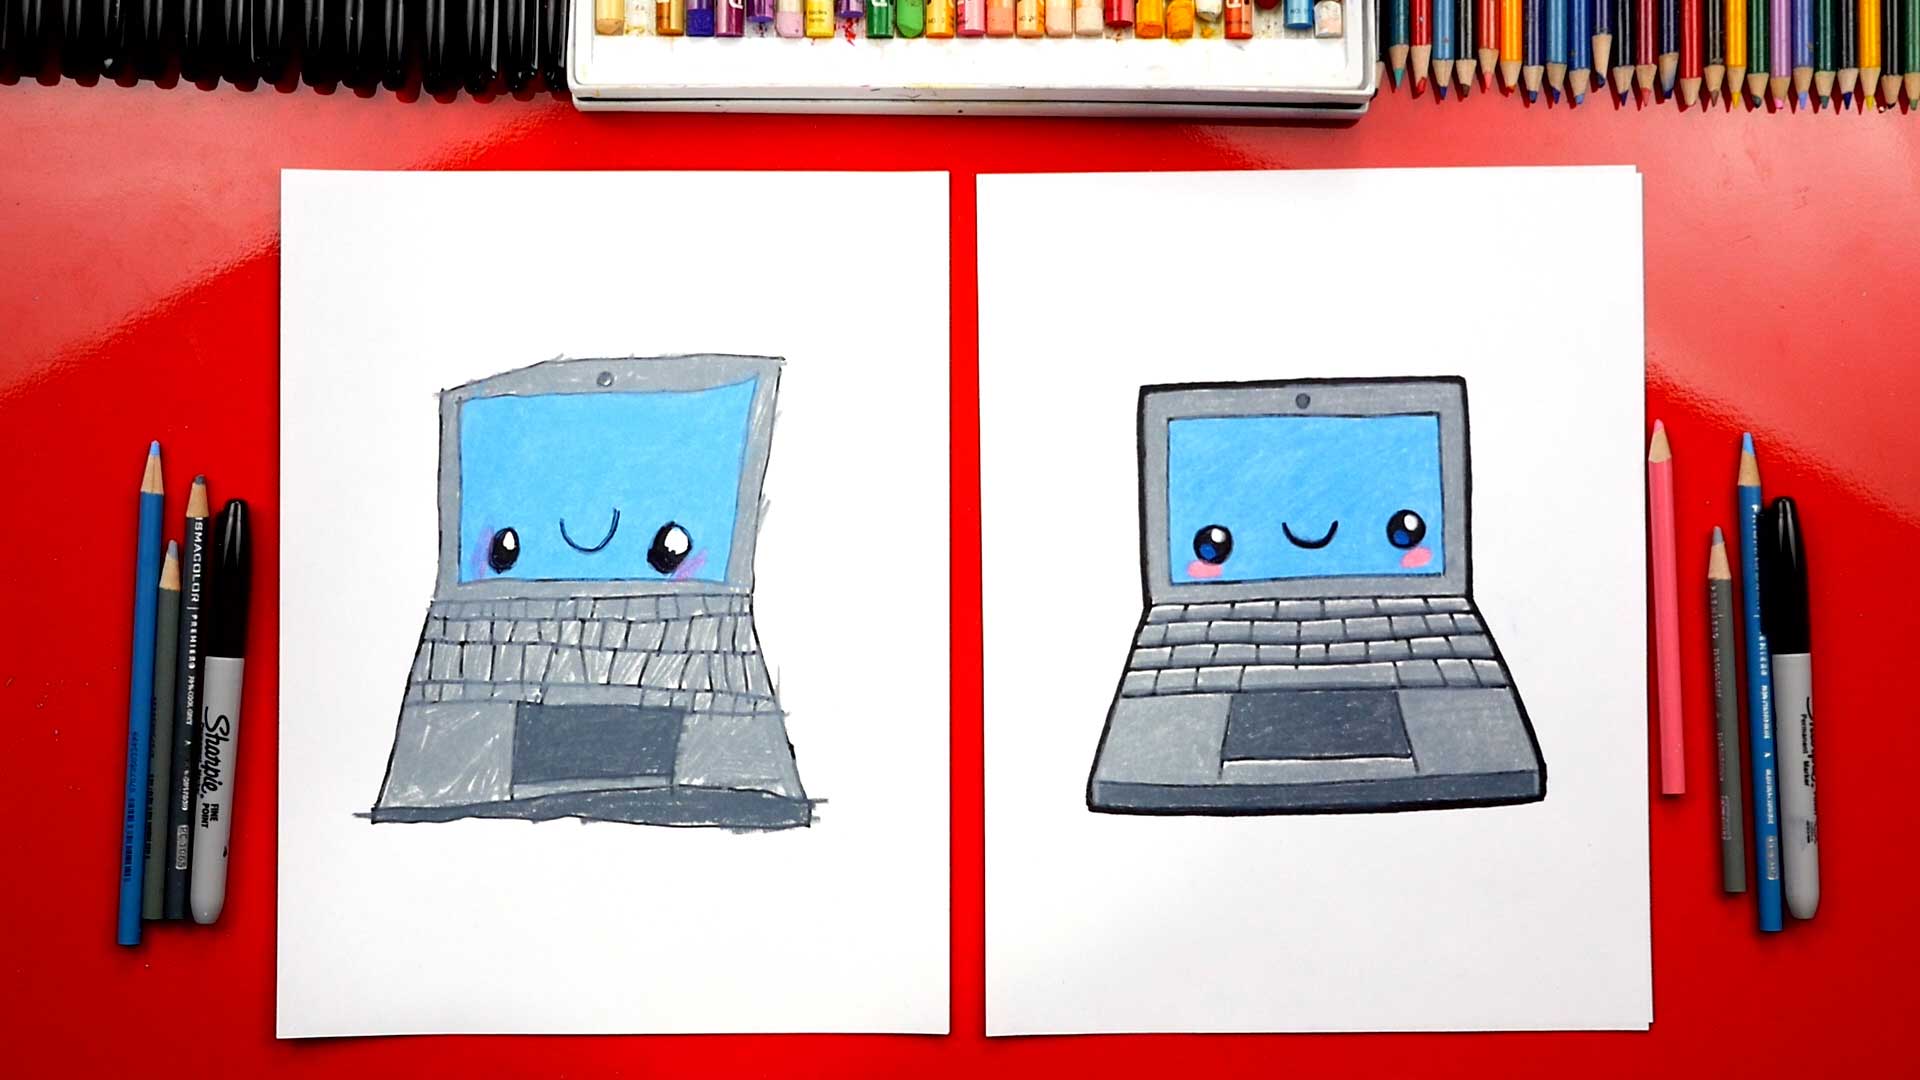 Illustration of a laptop computer with color and shading techniques